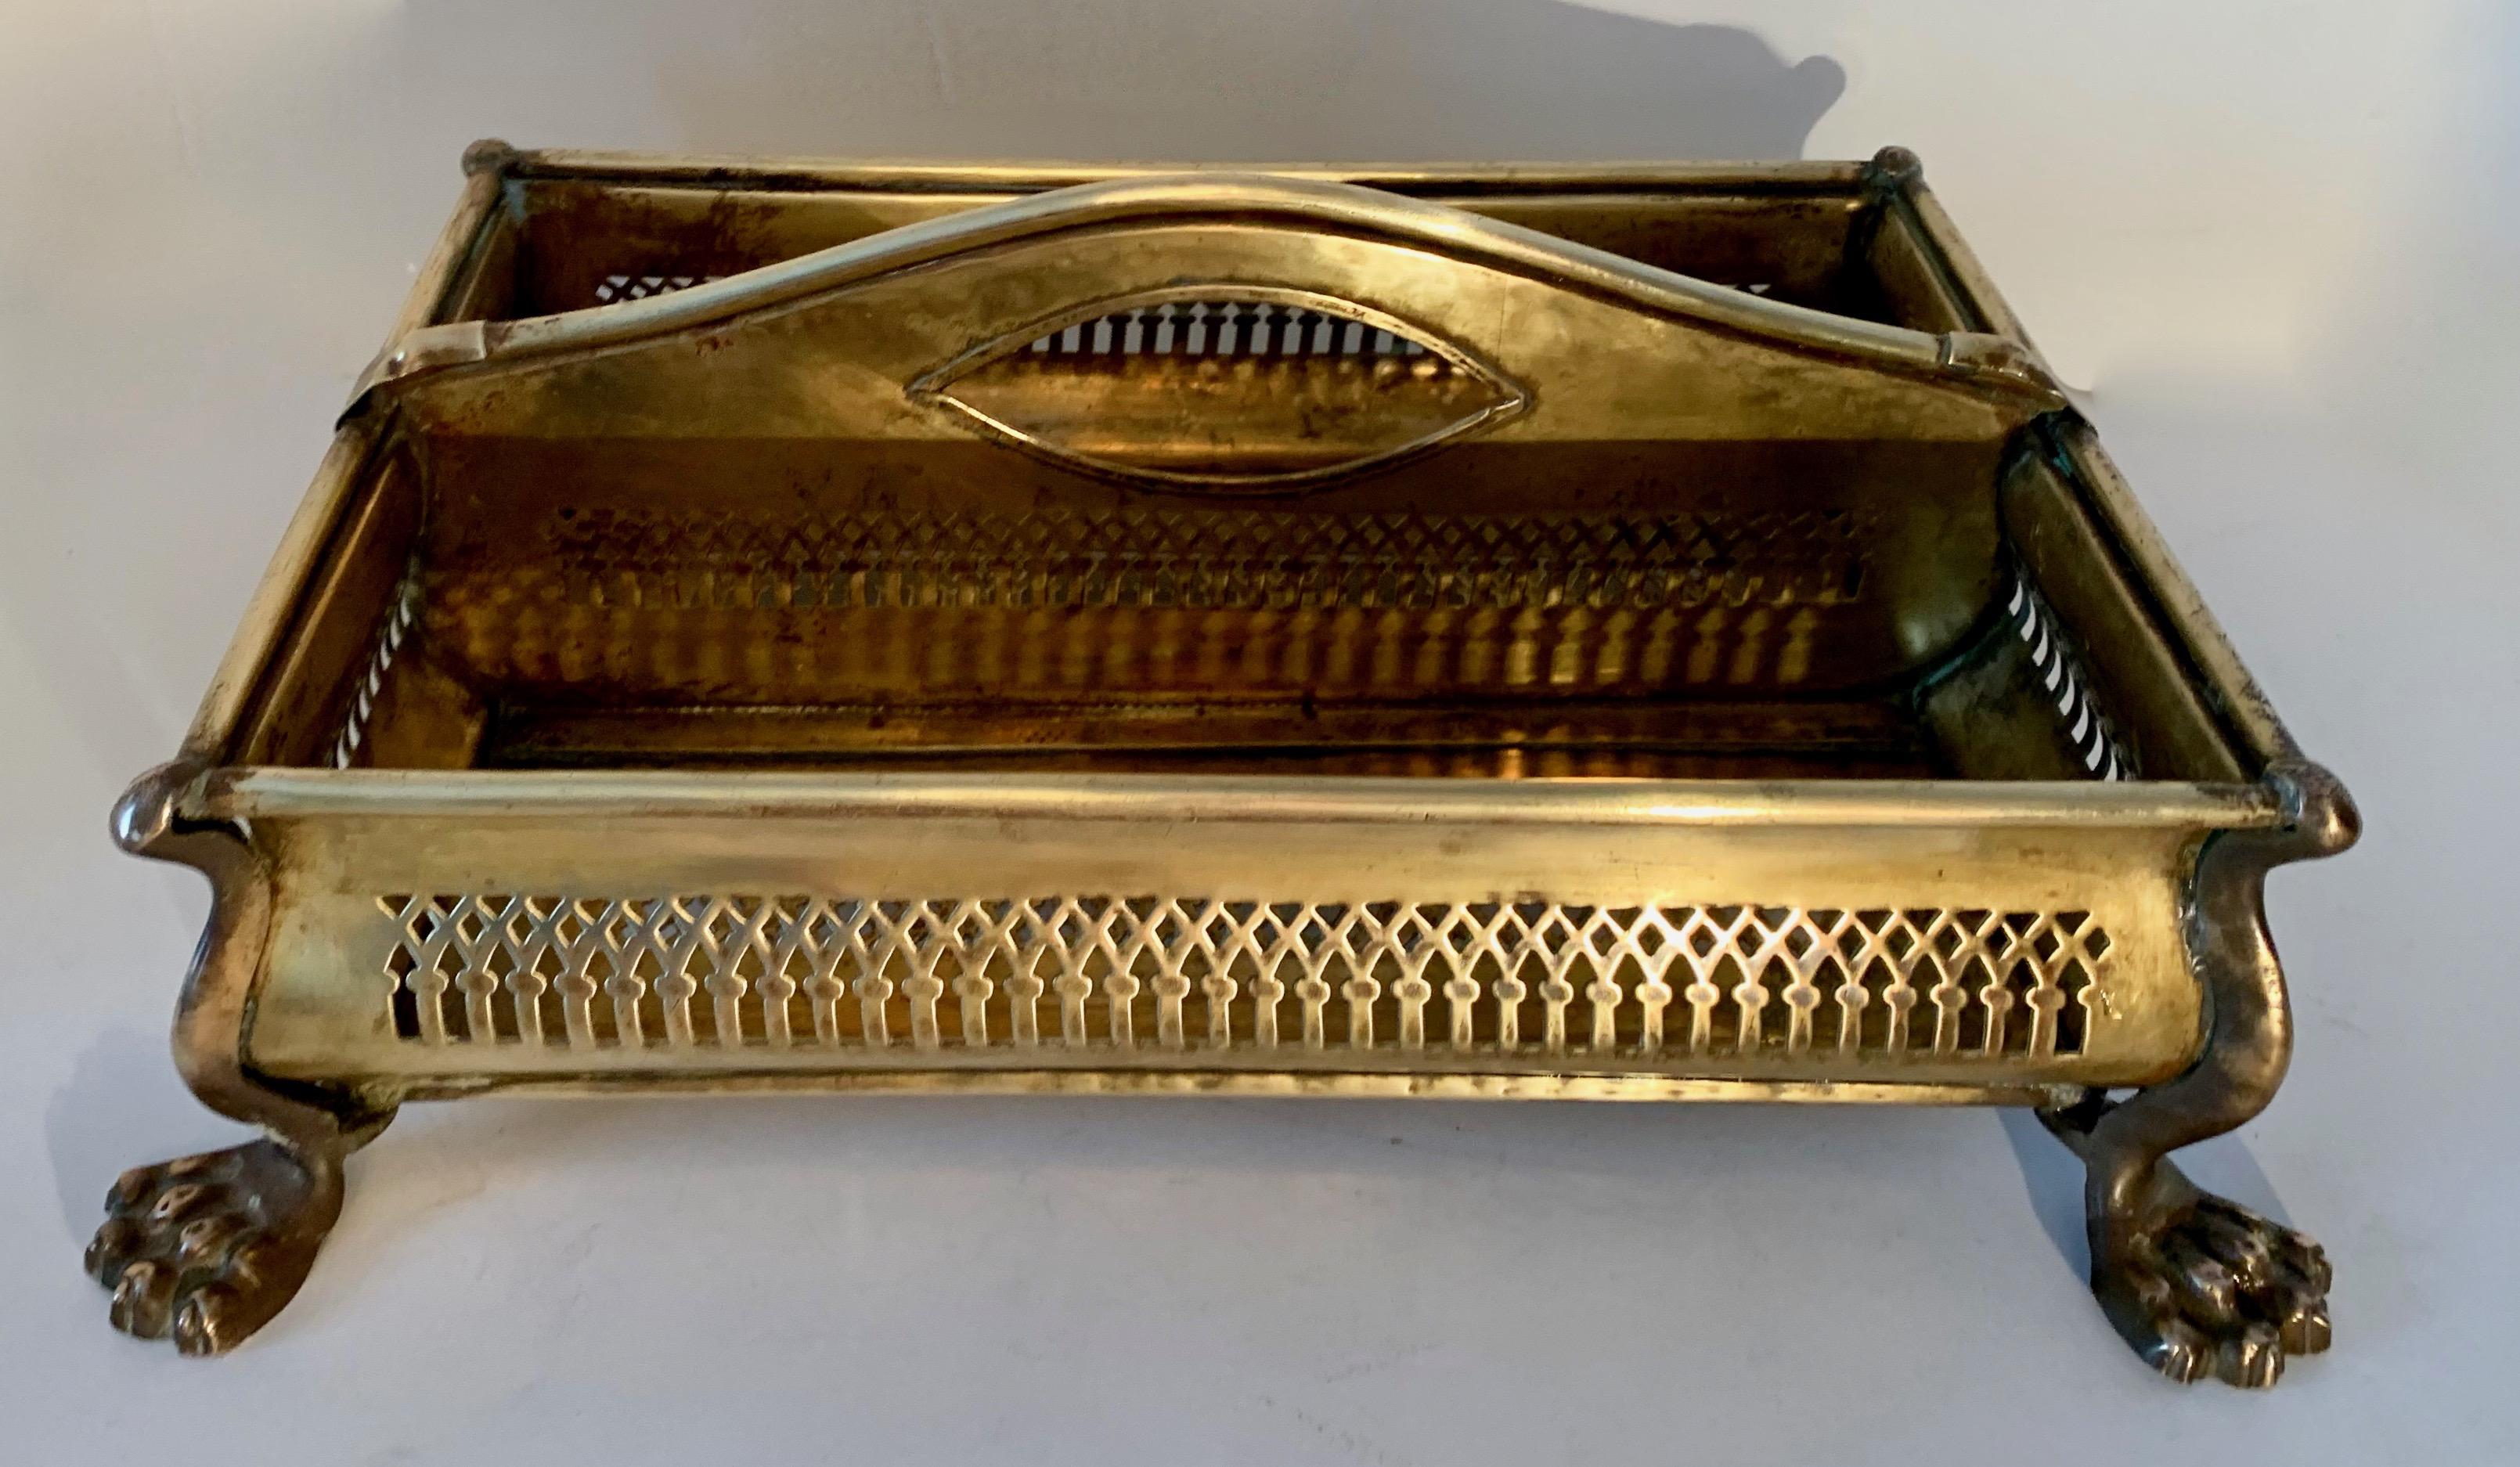 A handsome vintage brass, two-compartment caddy well suited for the vanity, food display, mail or even plants... a wonderfully designed piece sporting lions feet and intricately cut sides for great eye appeal. A wonderful desk accessory or catering